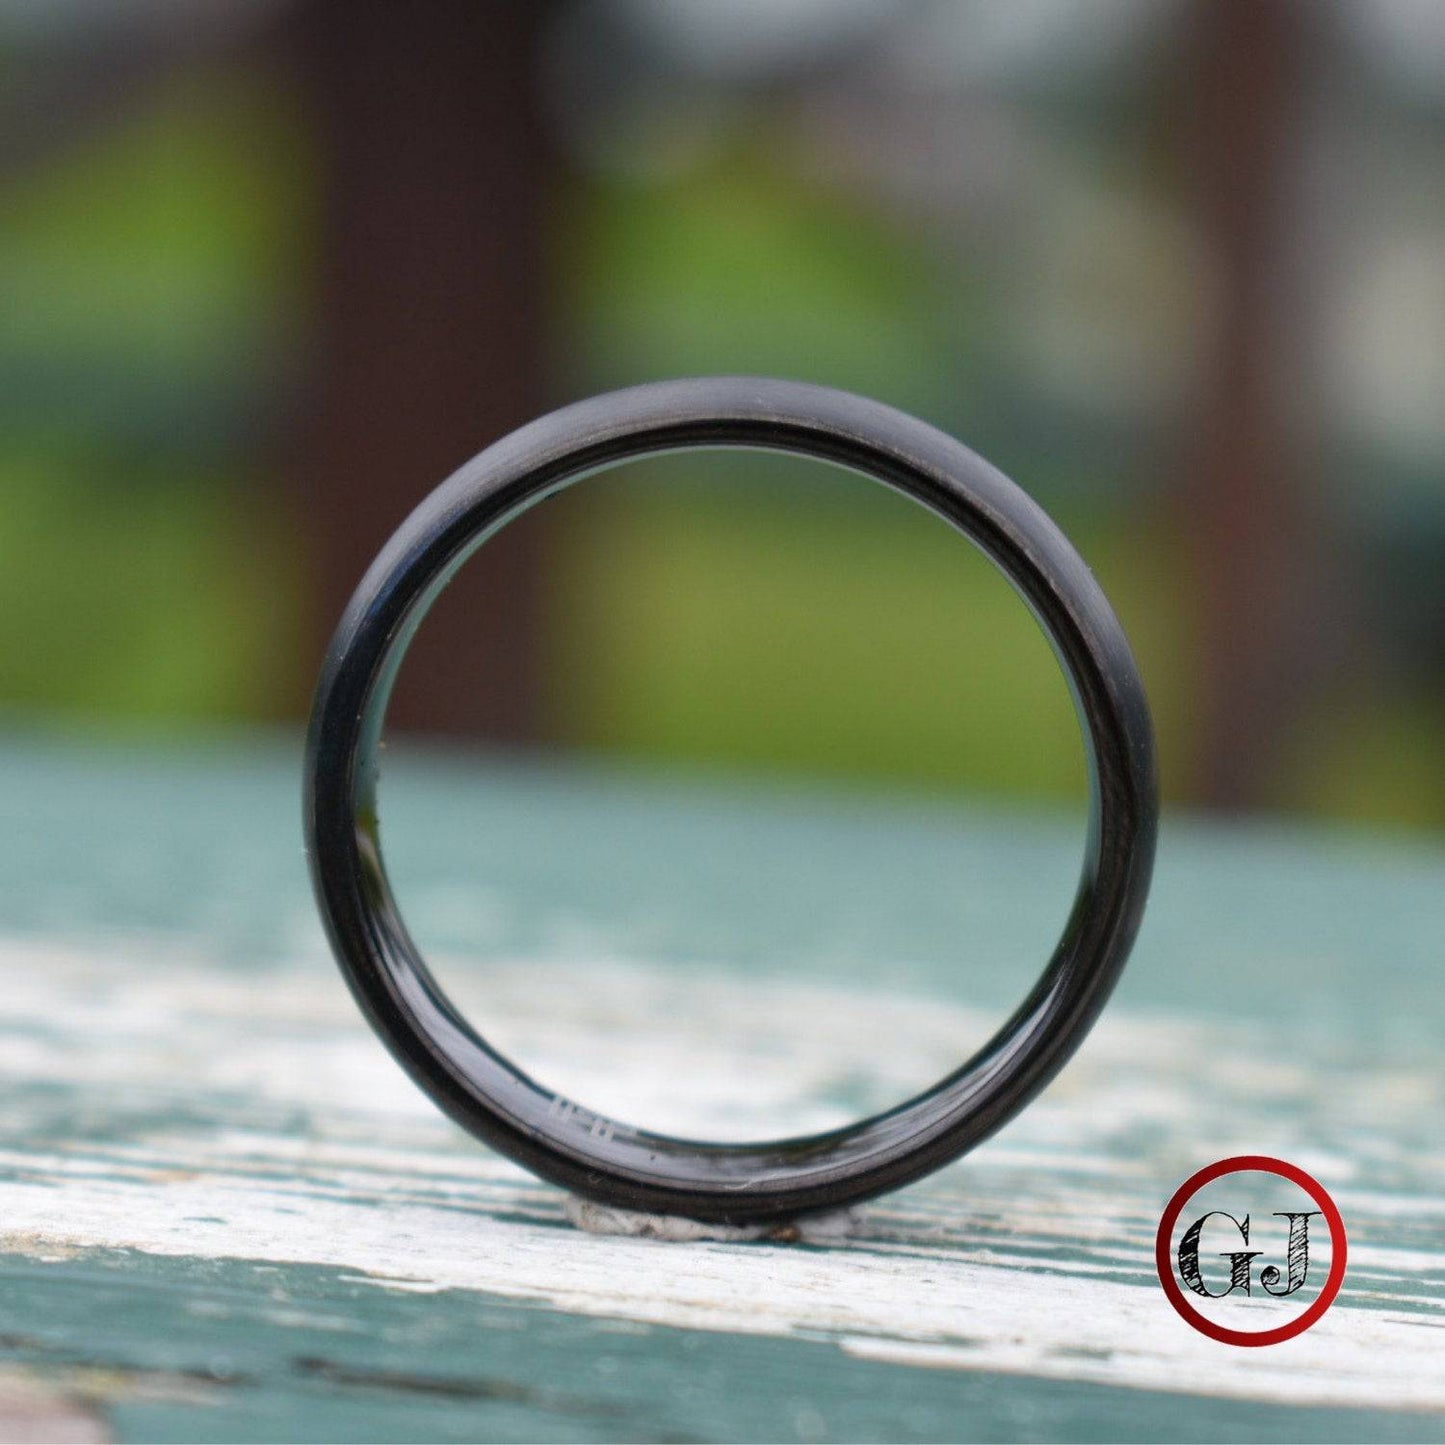 Black Brushed Tungsten 6mm Ring with Black Polished Inner Band - Tungsten Titans